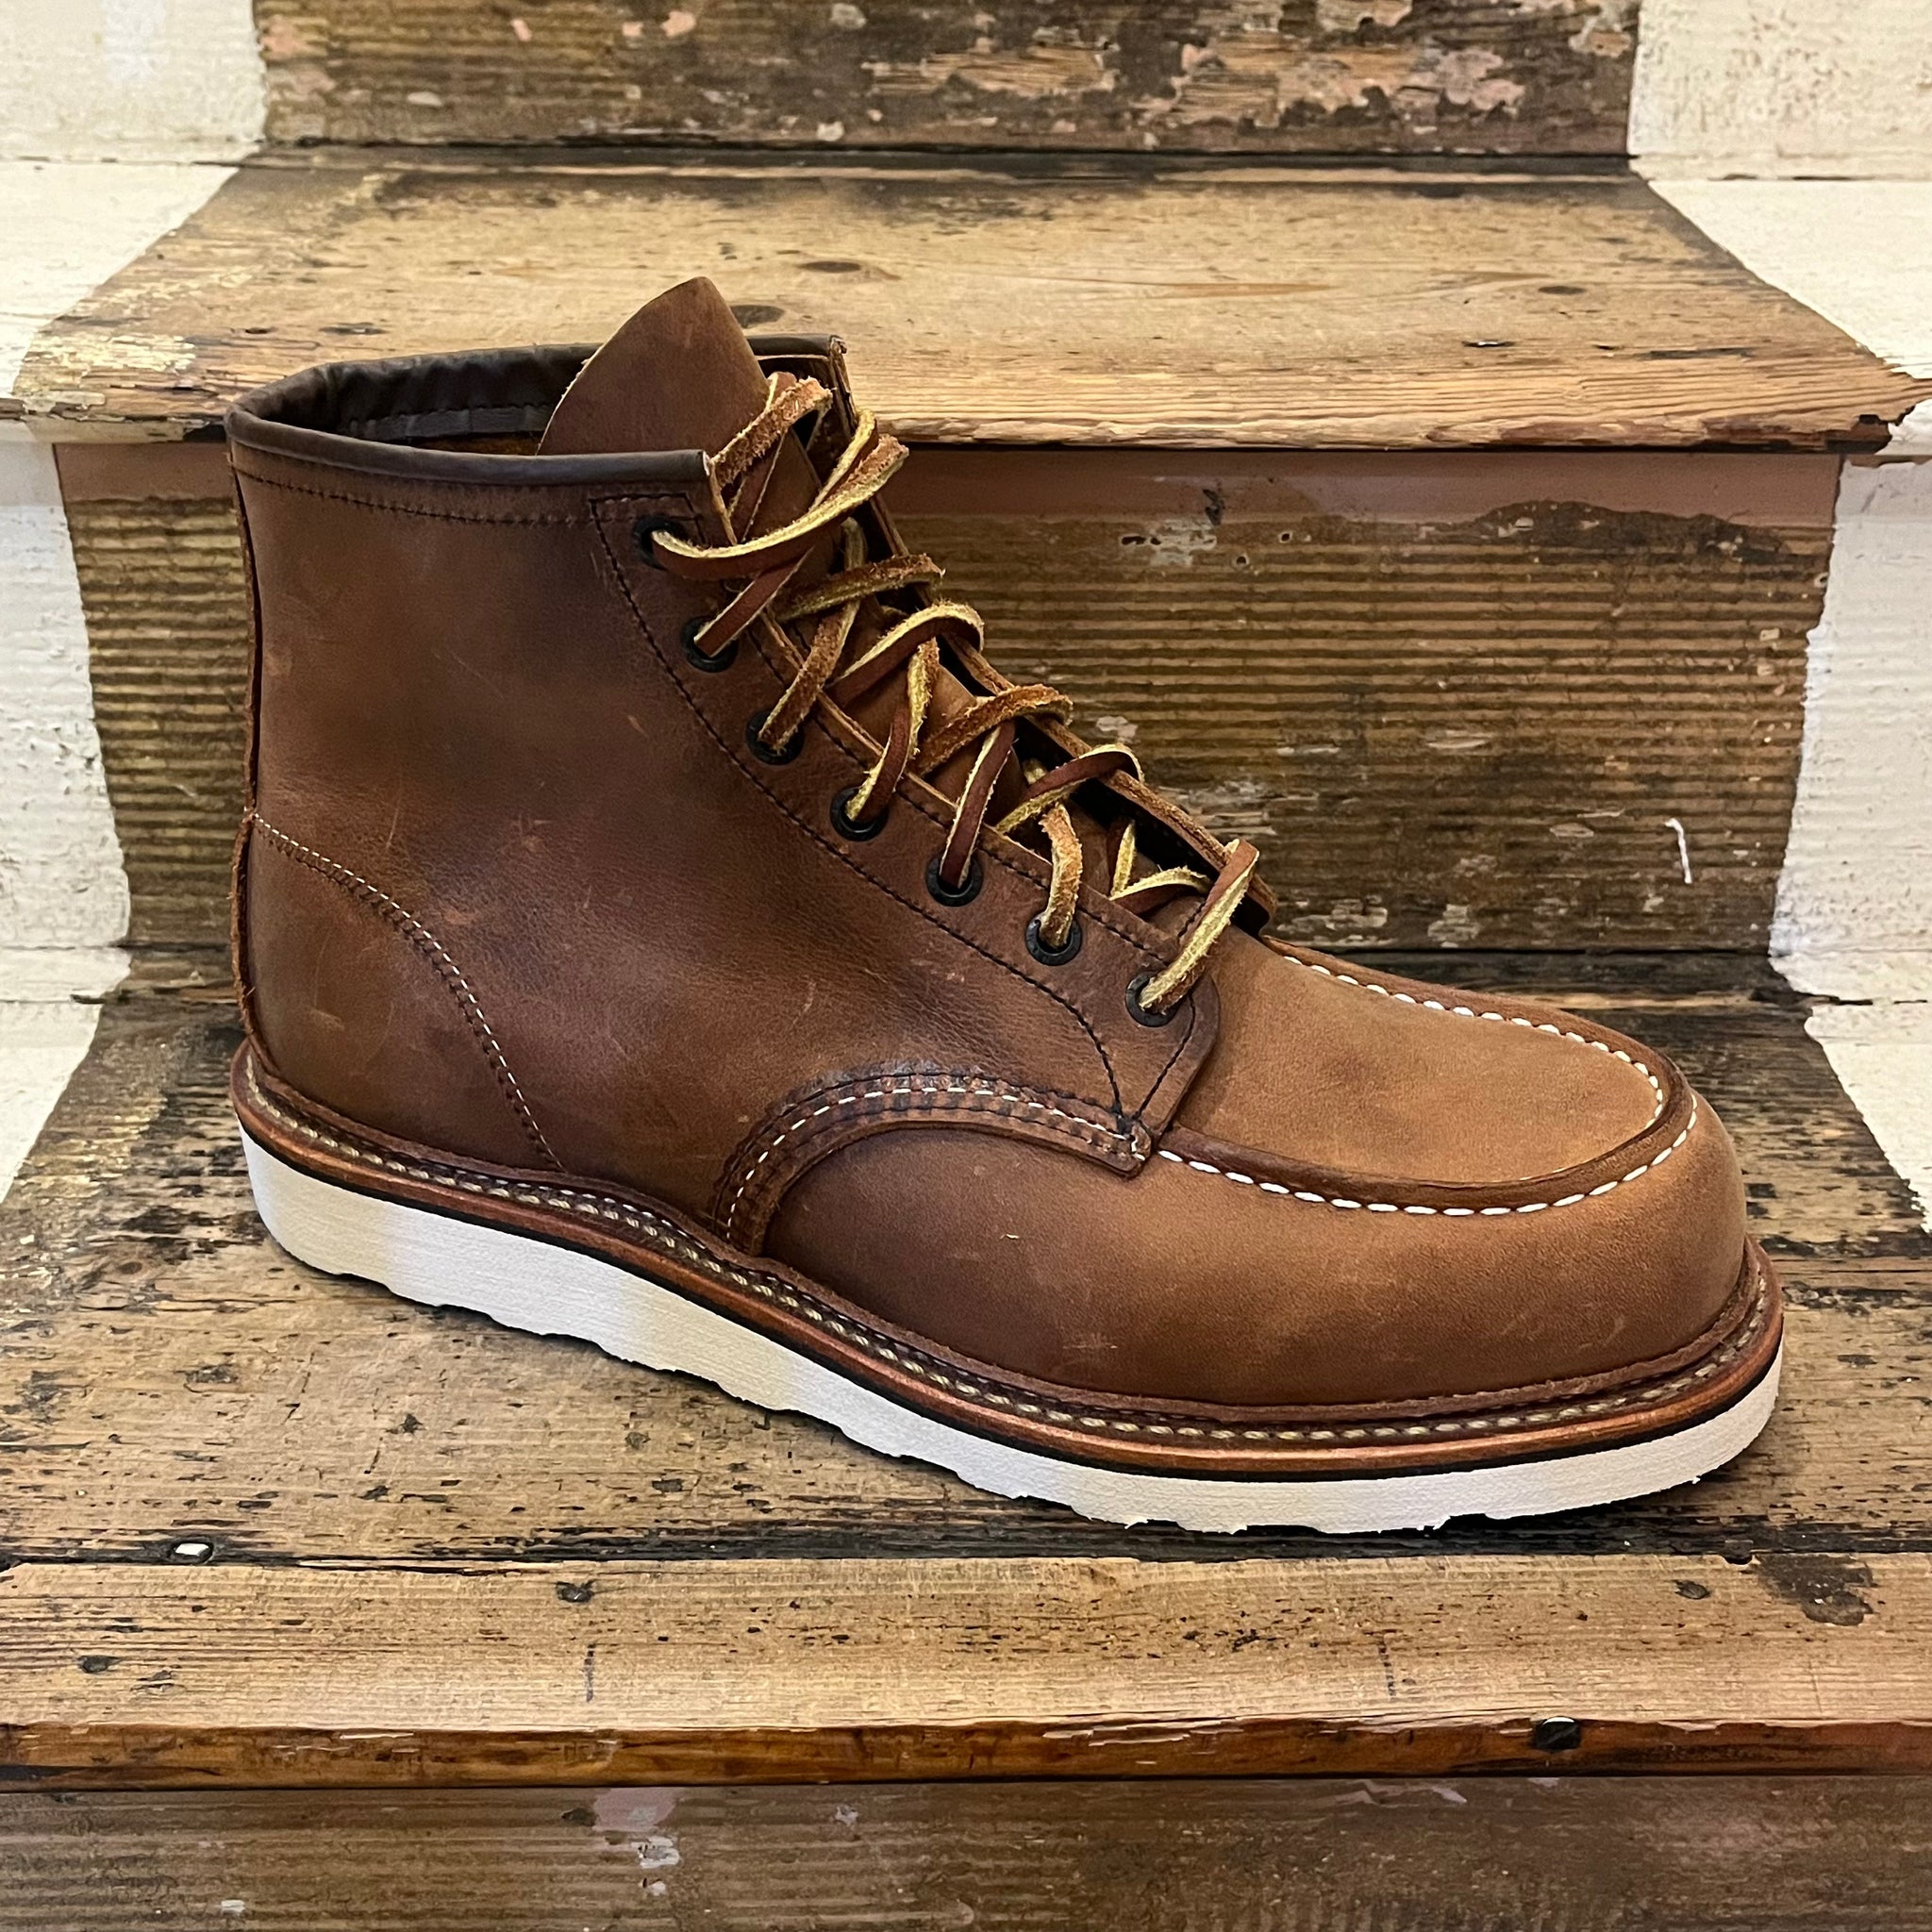 Red Wing moc toe boot in copper rough and tough leather